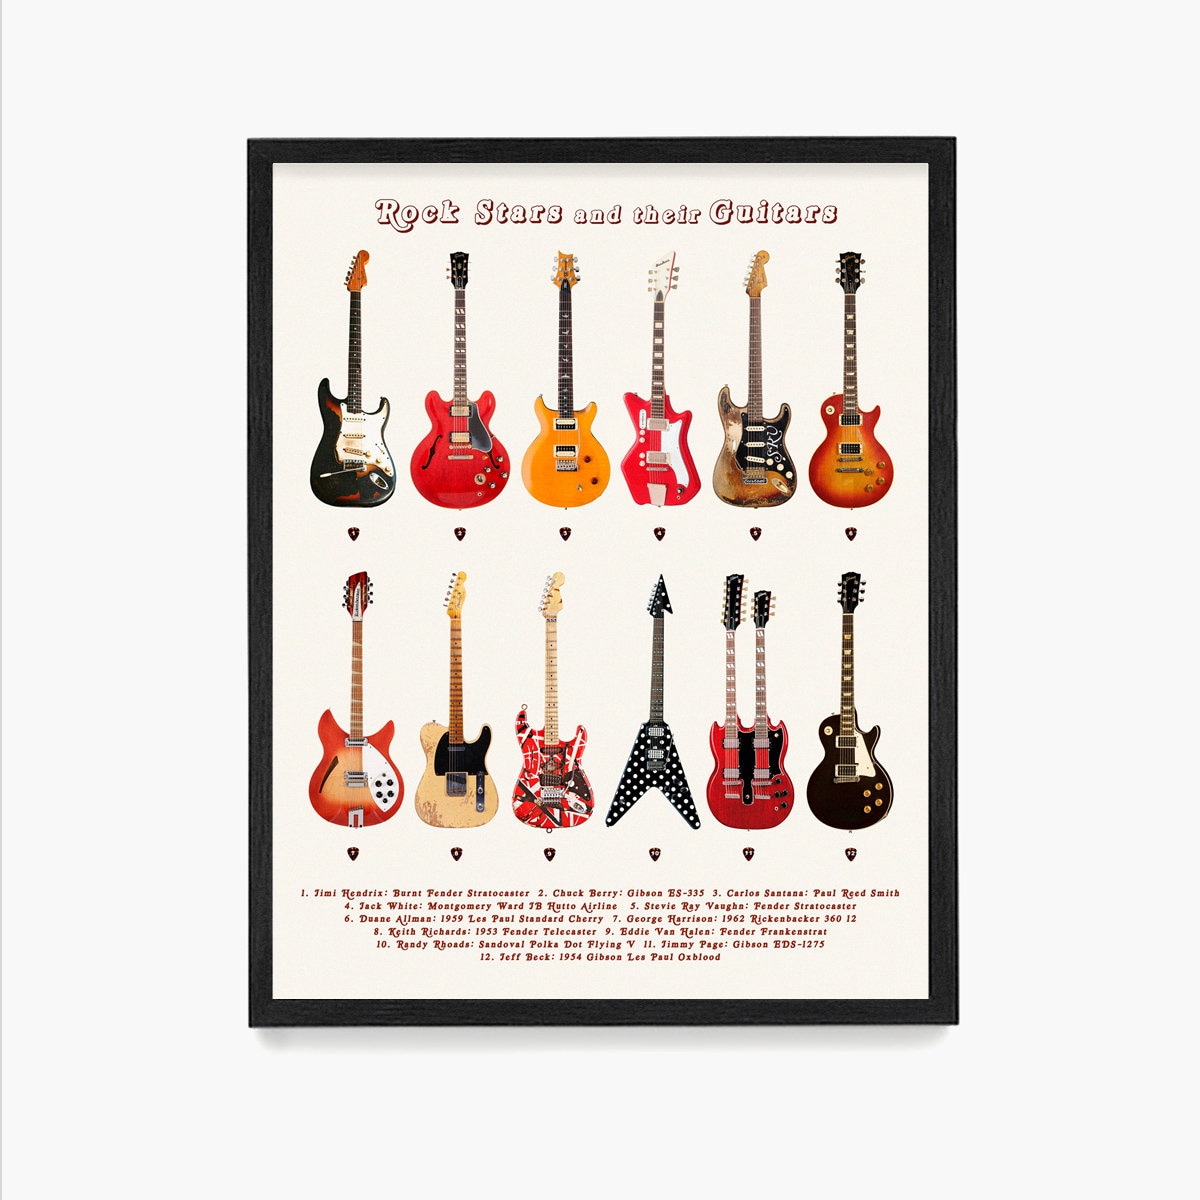 Guitar Poster, Rock Stars and Their Guitars, History of Rock N Roll, Rock N  Roll Poster, Music Wall Art, Guitar Wall Art, Hendrix Guitar - Etsy